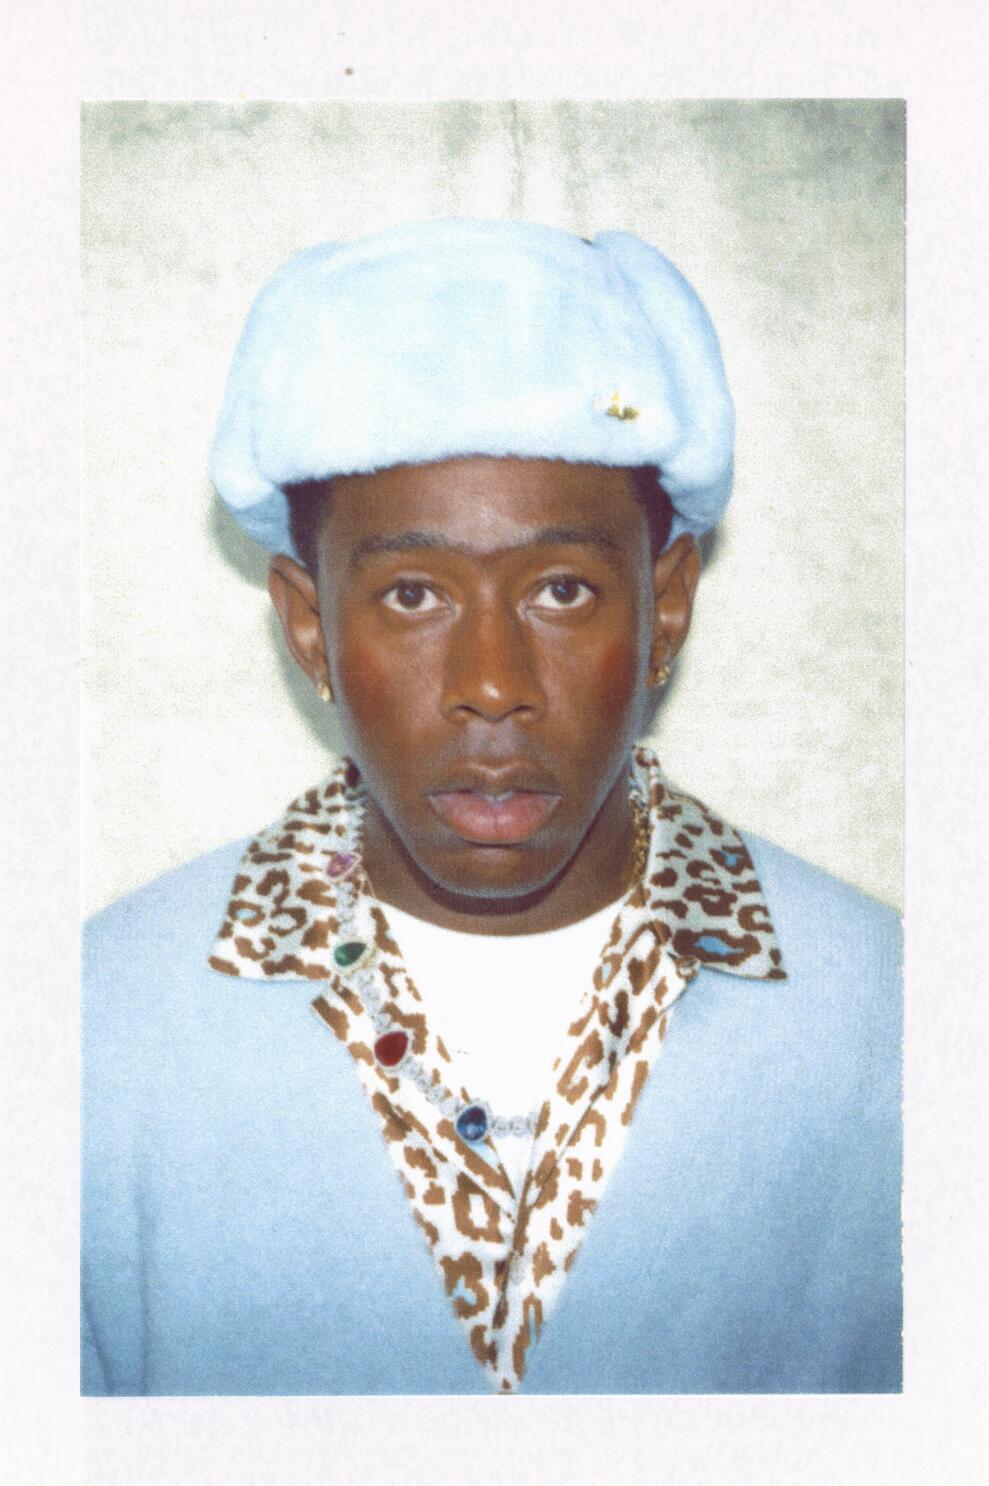 What They're Rocking // Tyler the Creator